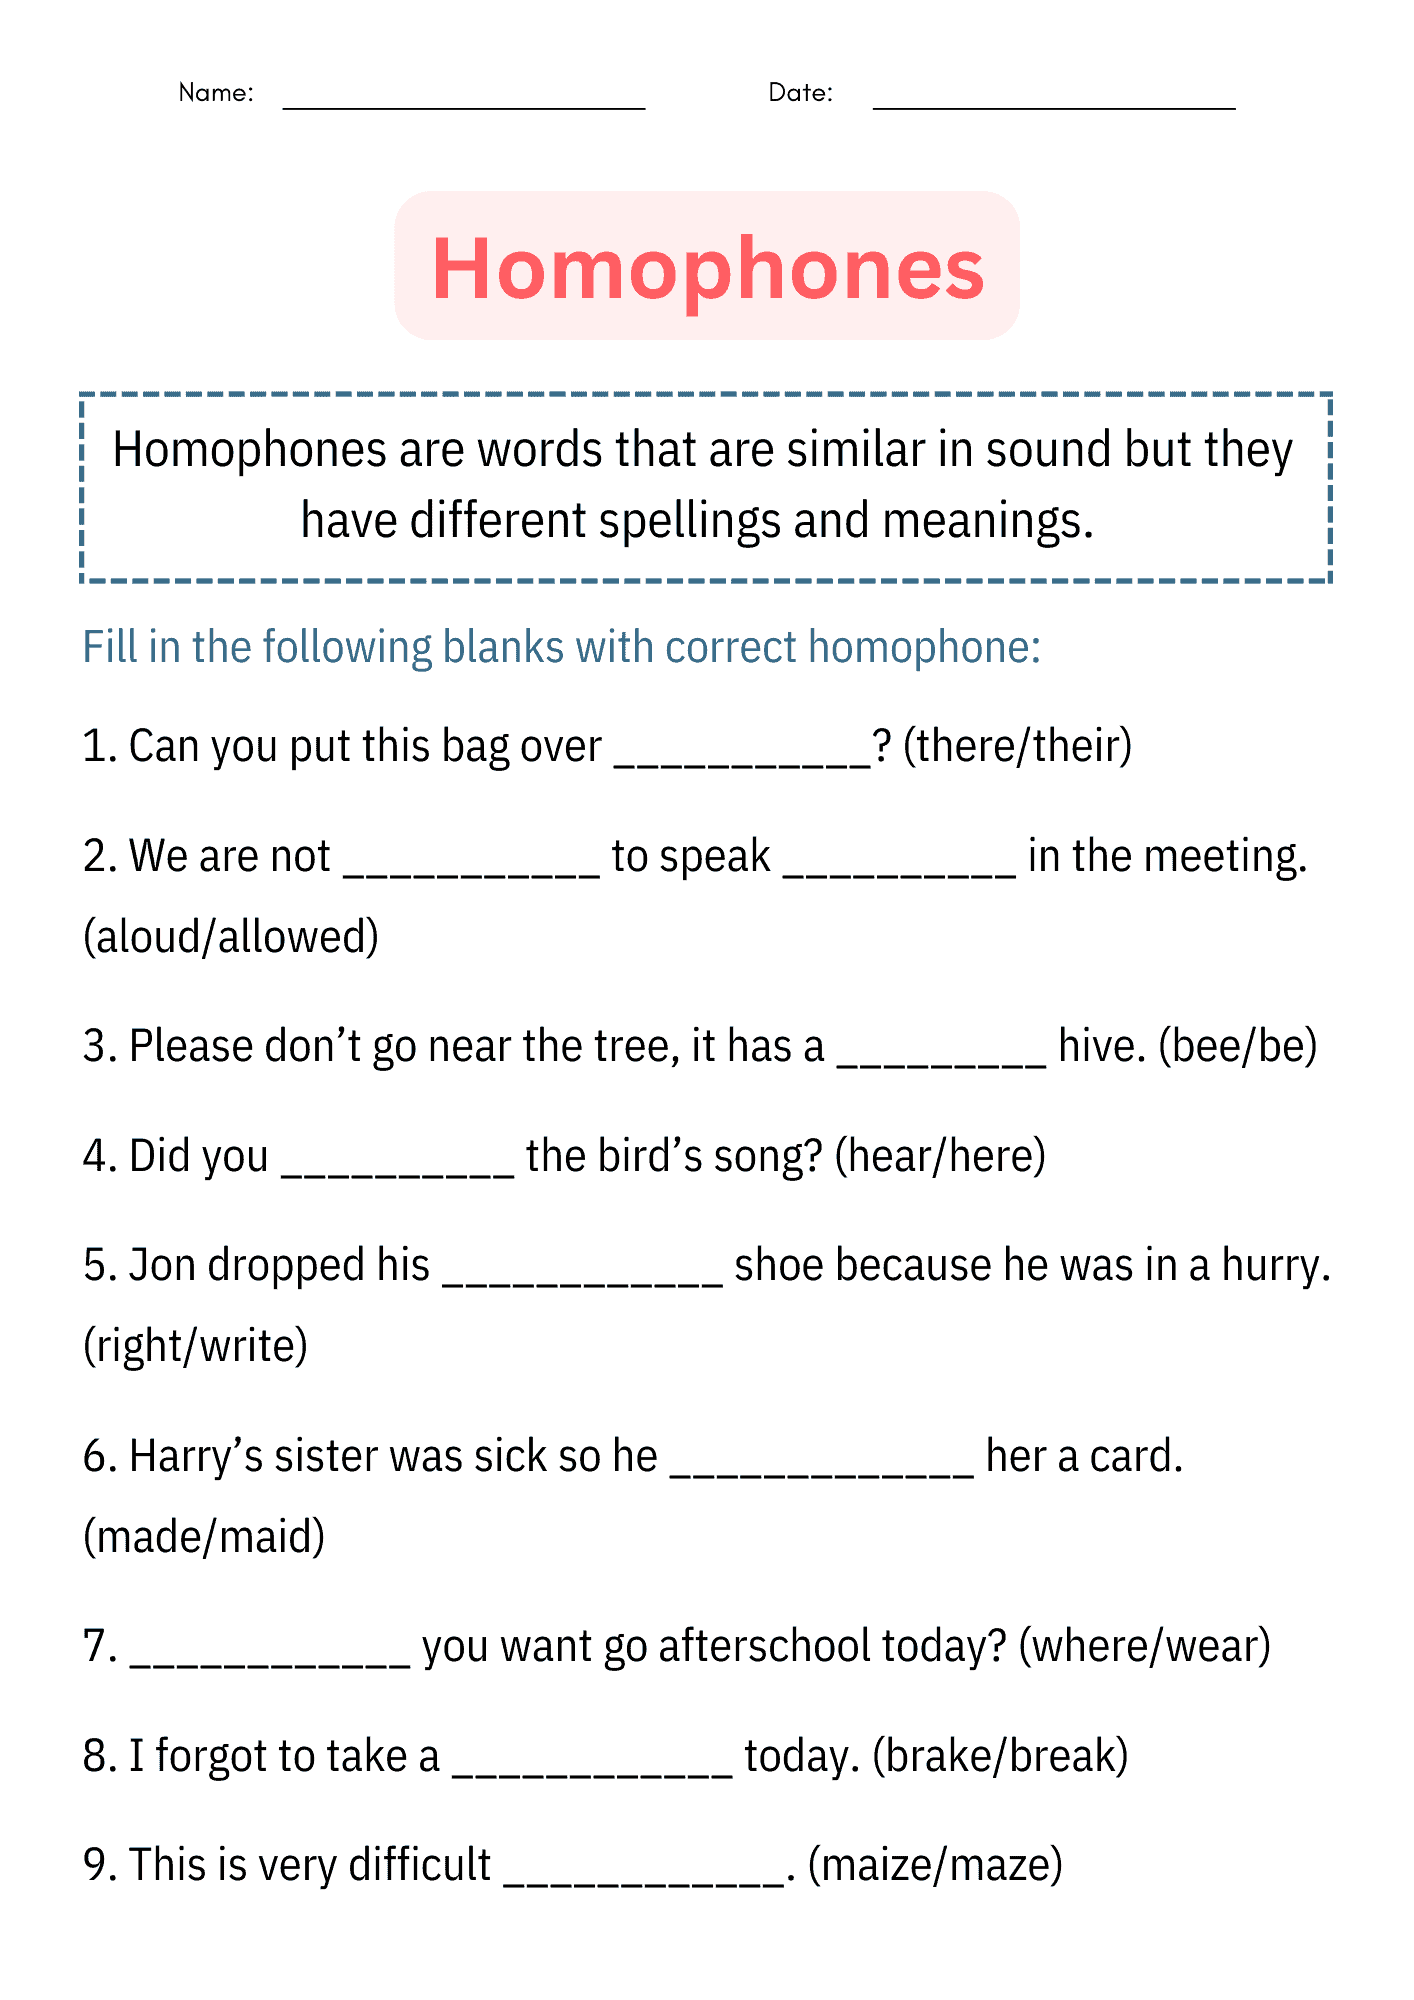 Homophones Grammar Worksheets And Activities For 2nd 3rd And 4th Grade Made By Teachers